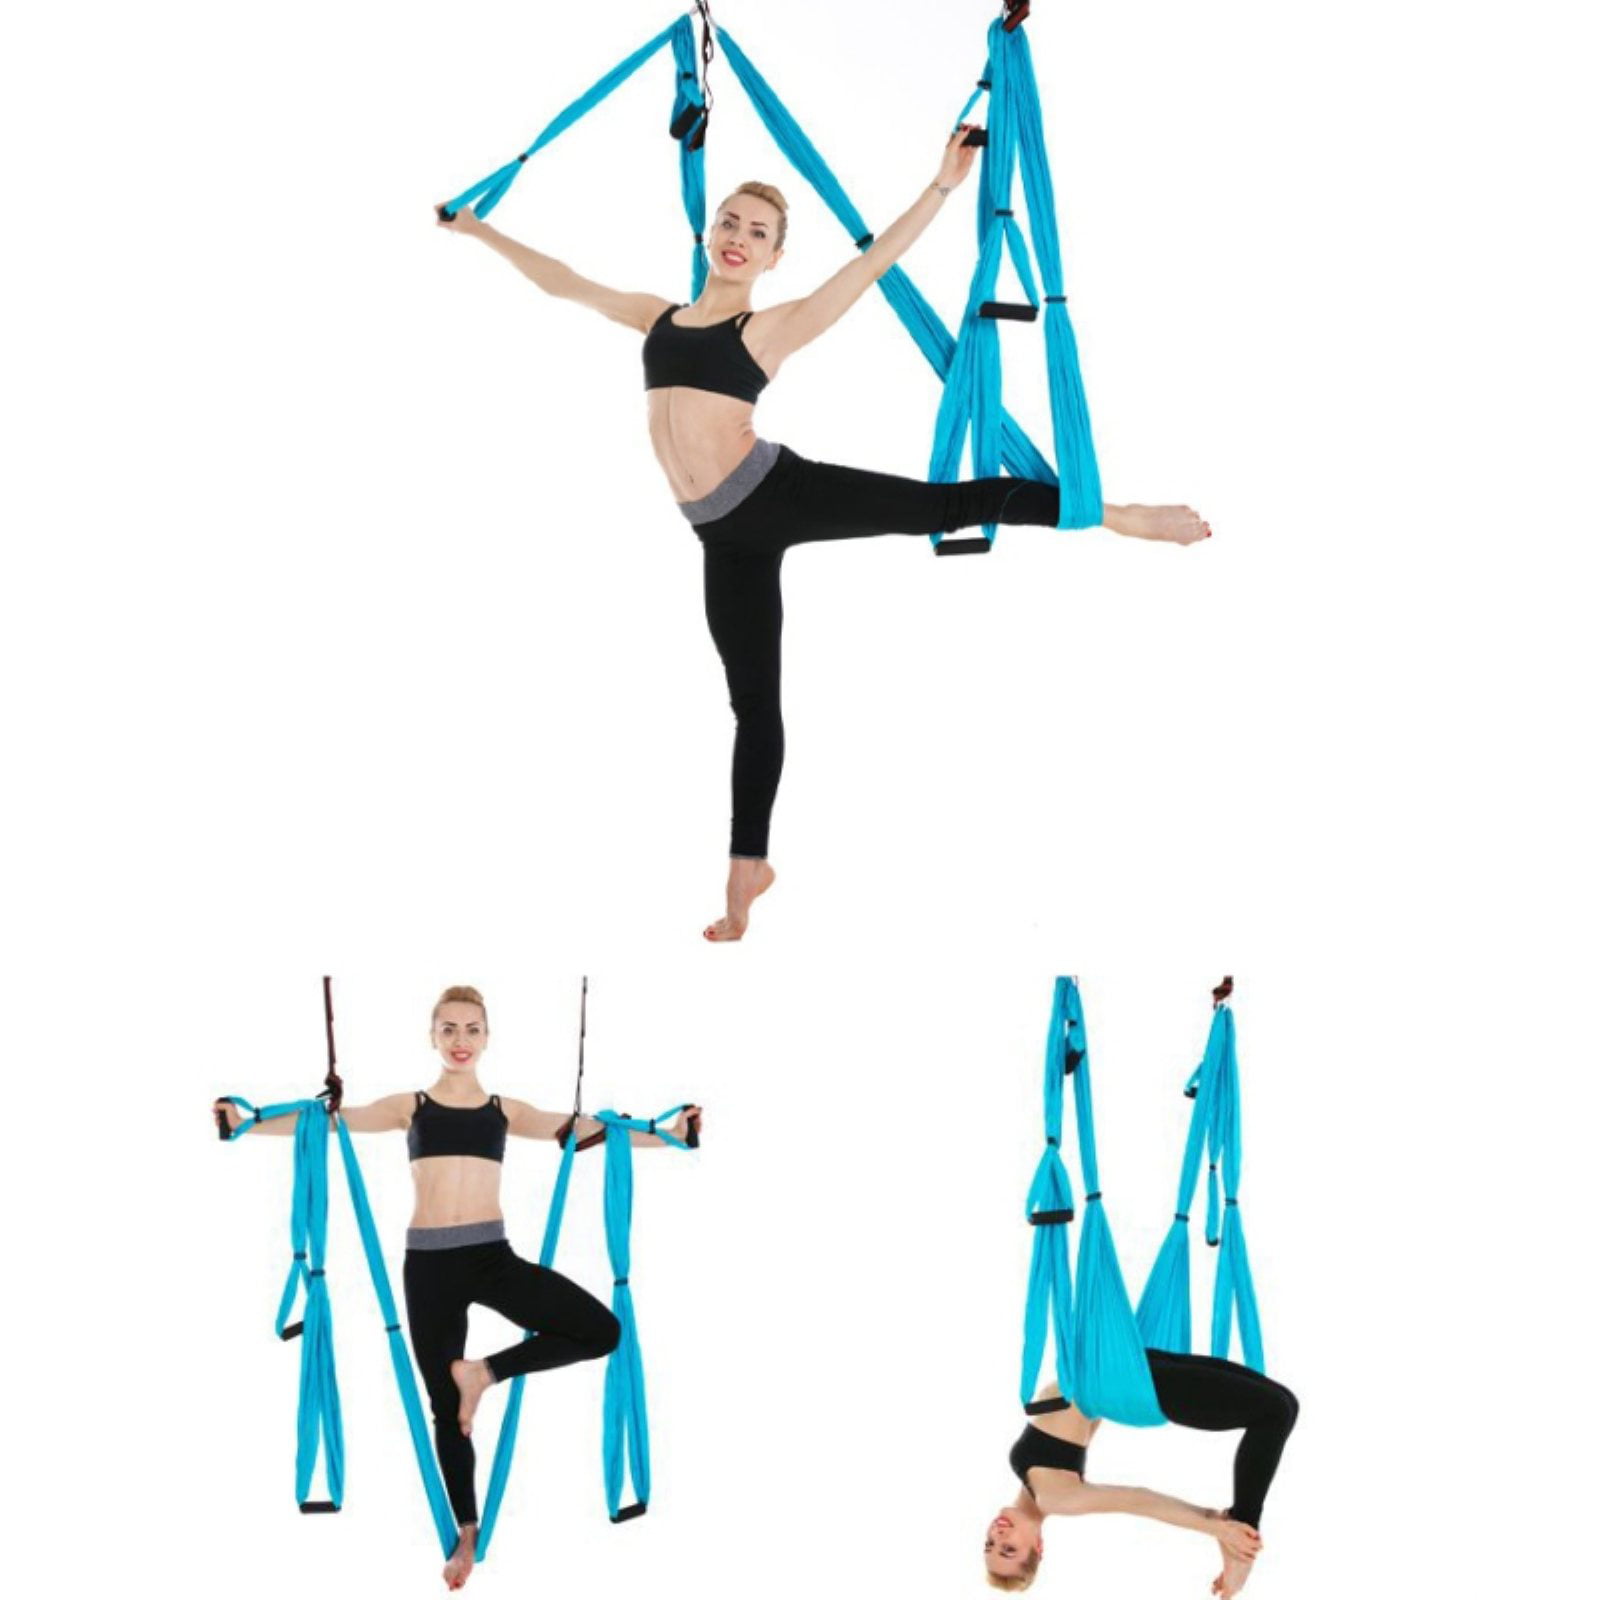 Details about   Aerial Yoga Swing Set Trapeze Equipment Yoga Hammock Kit Strong Anti-Gravity 